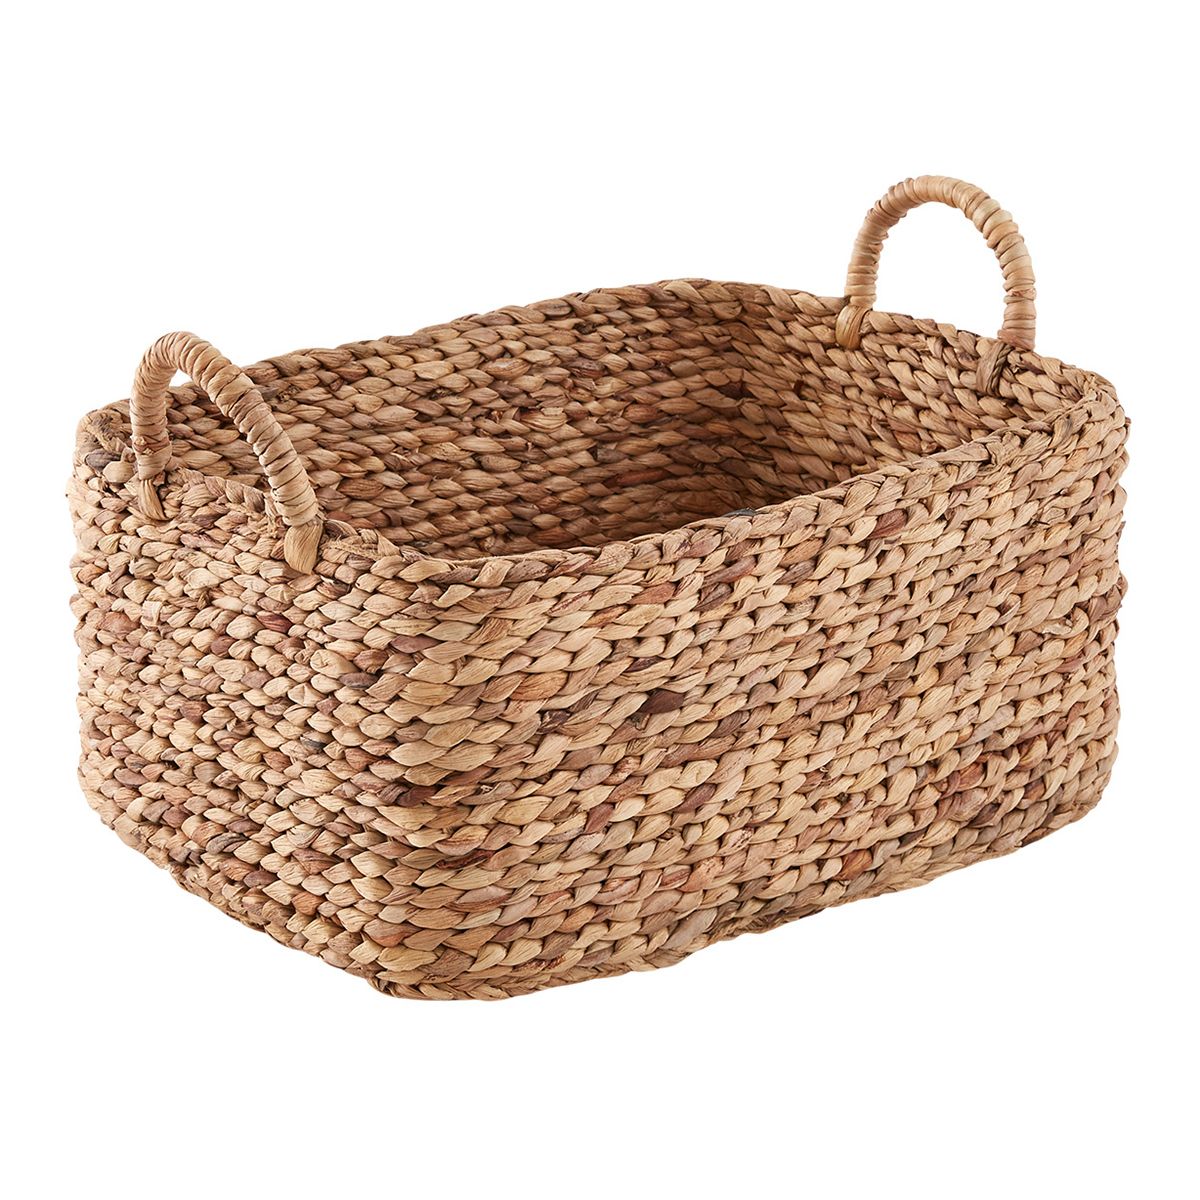 Large Water Hyacinth Braided Weave Bin NaturalSKU:100777285.07 Reviews | The Container Store